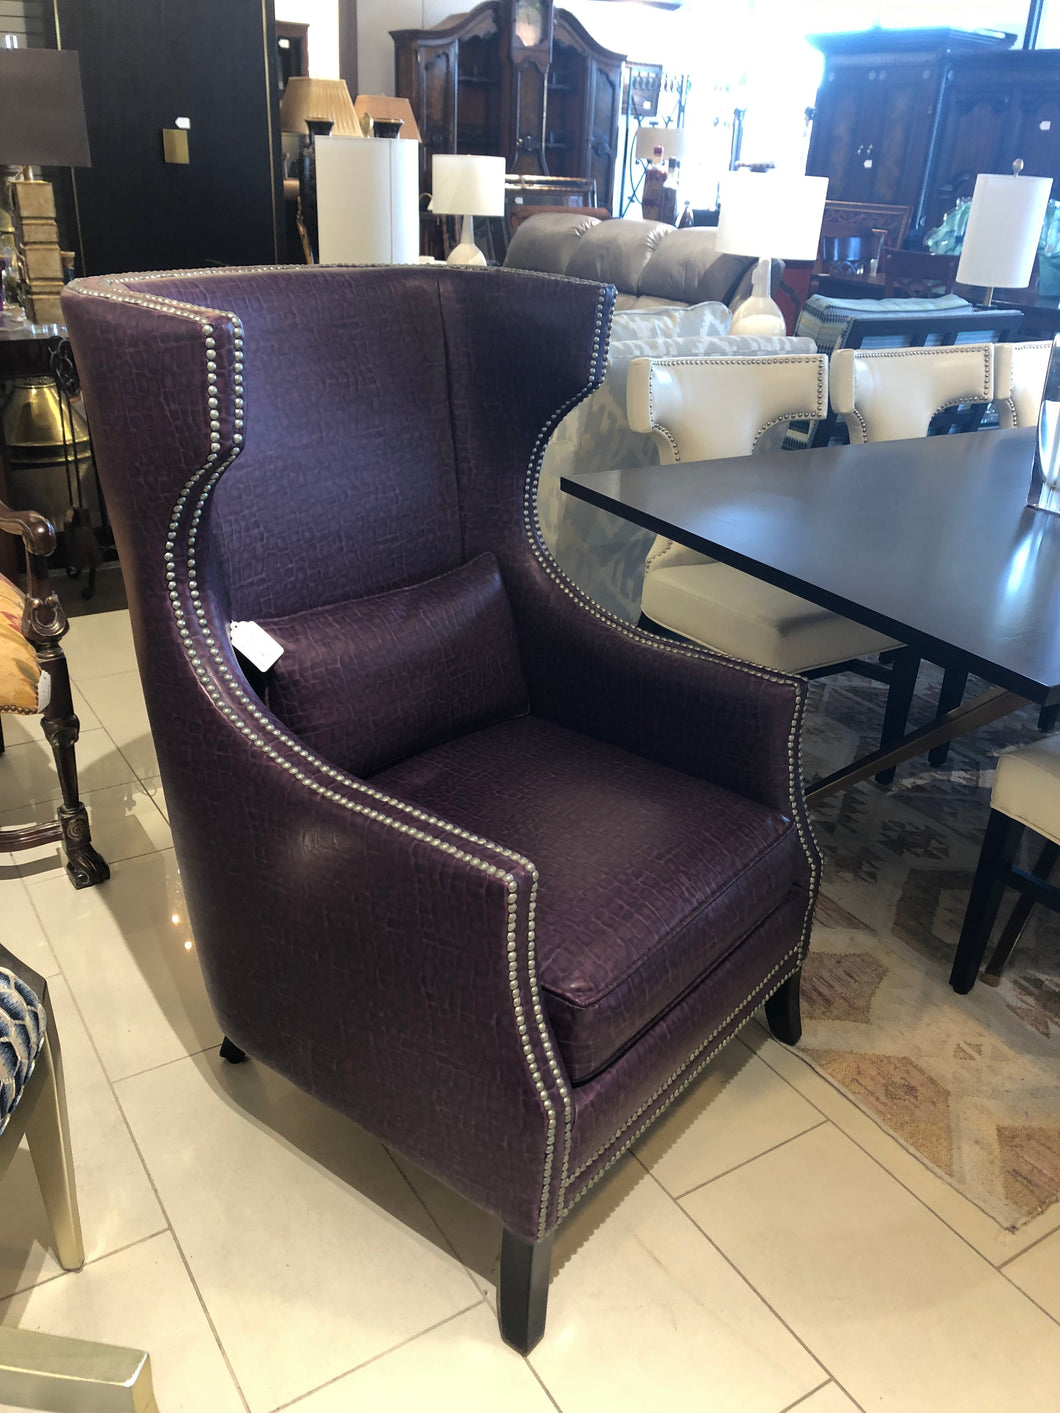 2 Purple Leather Chairs - Sold